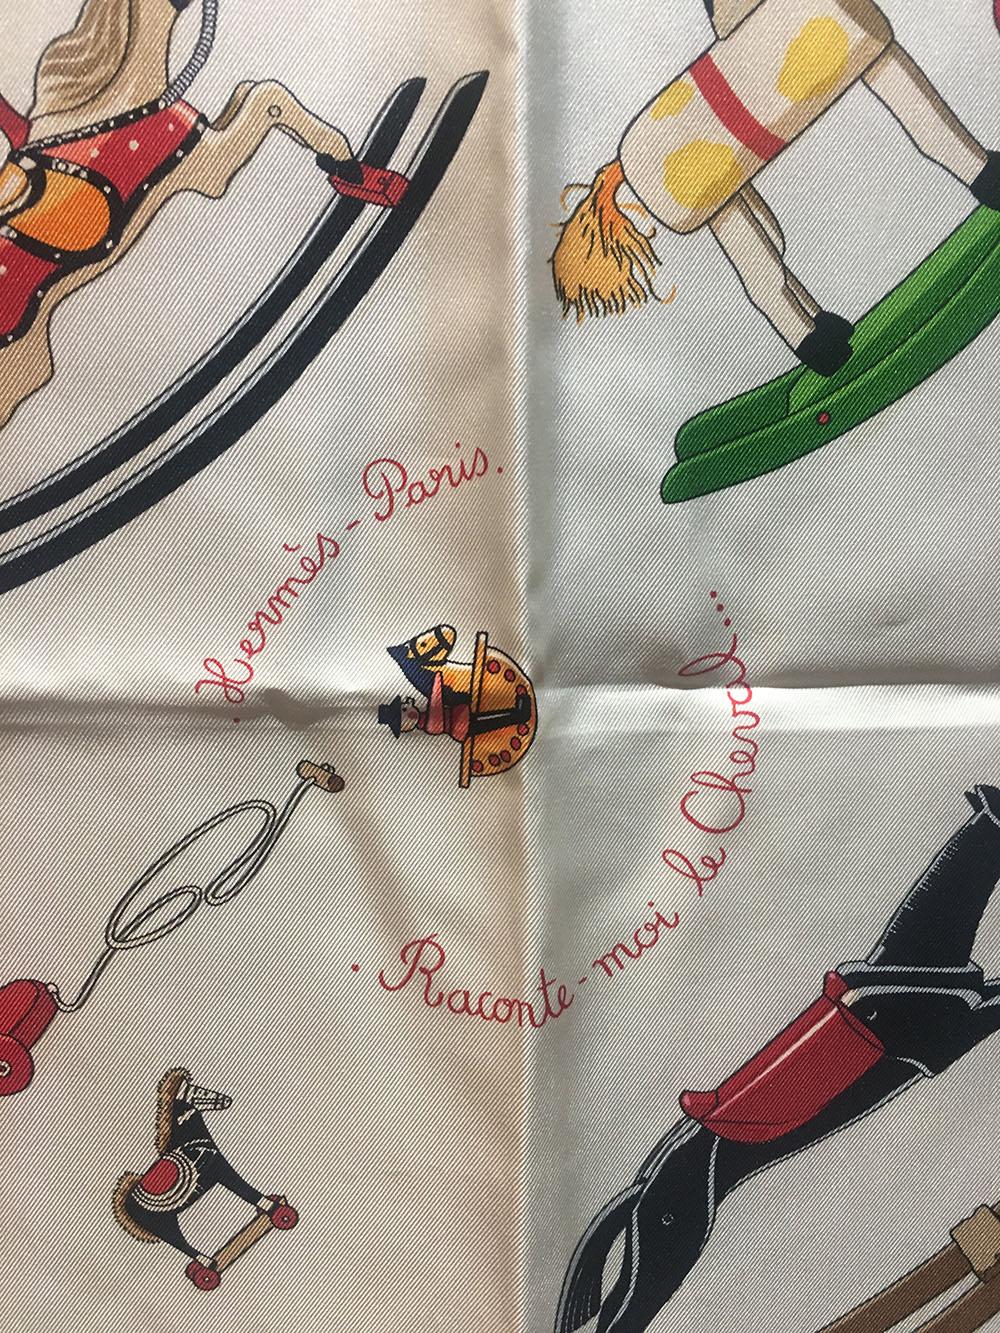 RARE Limited Edition Hermes Raconte-Moi Le Cheval Silk Scarf in Red in excellent condition. Original silk screen design c2000 by Dimitri Rybaltchenko features various multi color rocking horses over an ivory background surrounded by a thin red